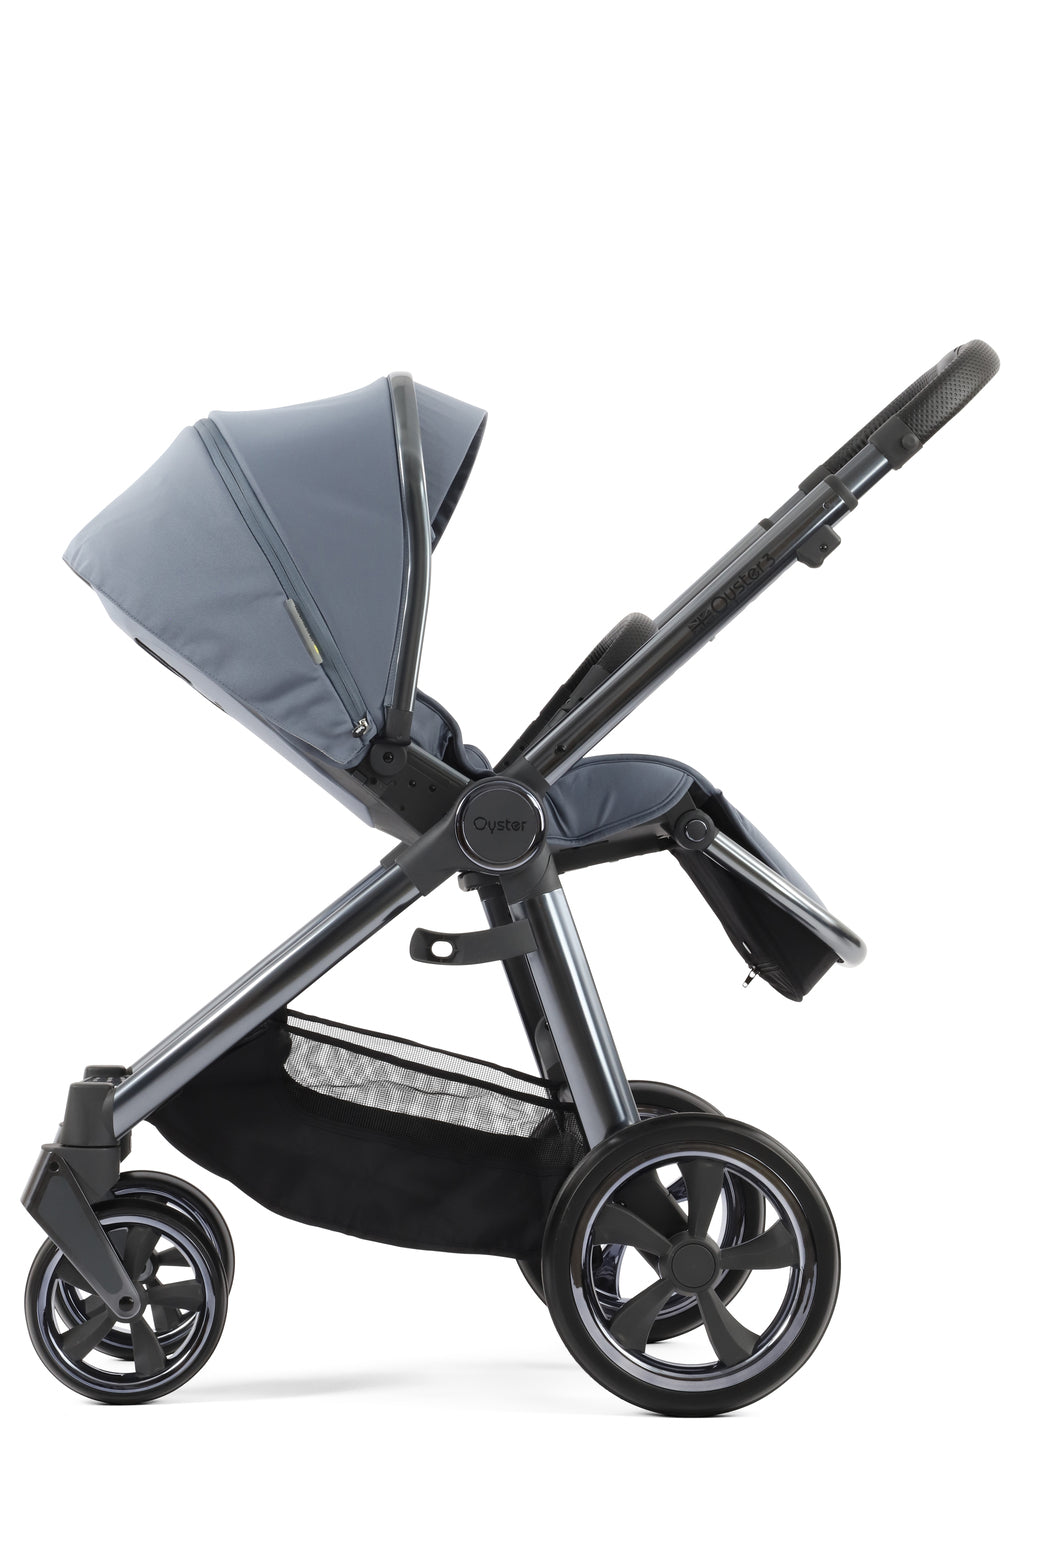 Babystyle Oyster 3 Pushchair + Carrycot - Dream Blue - For Your Little One